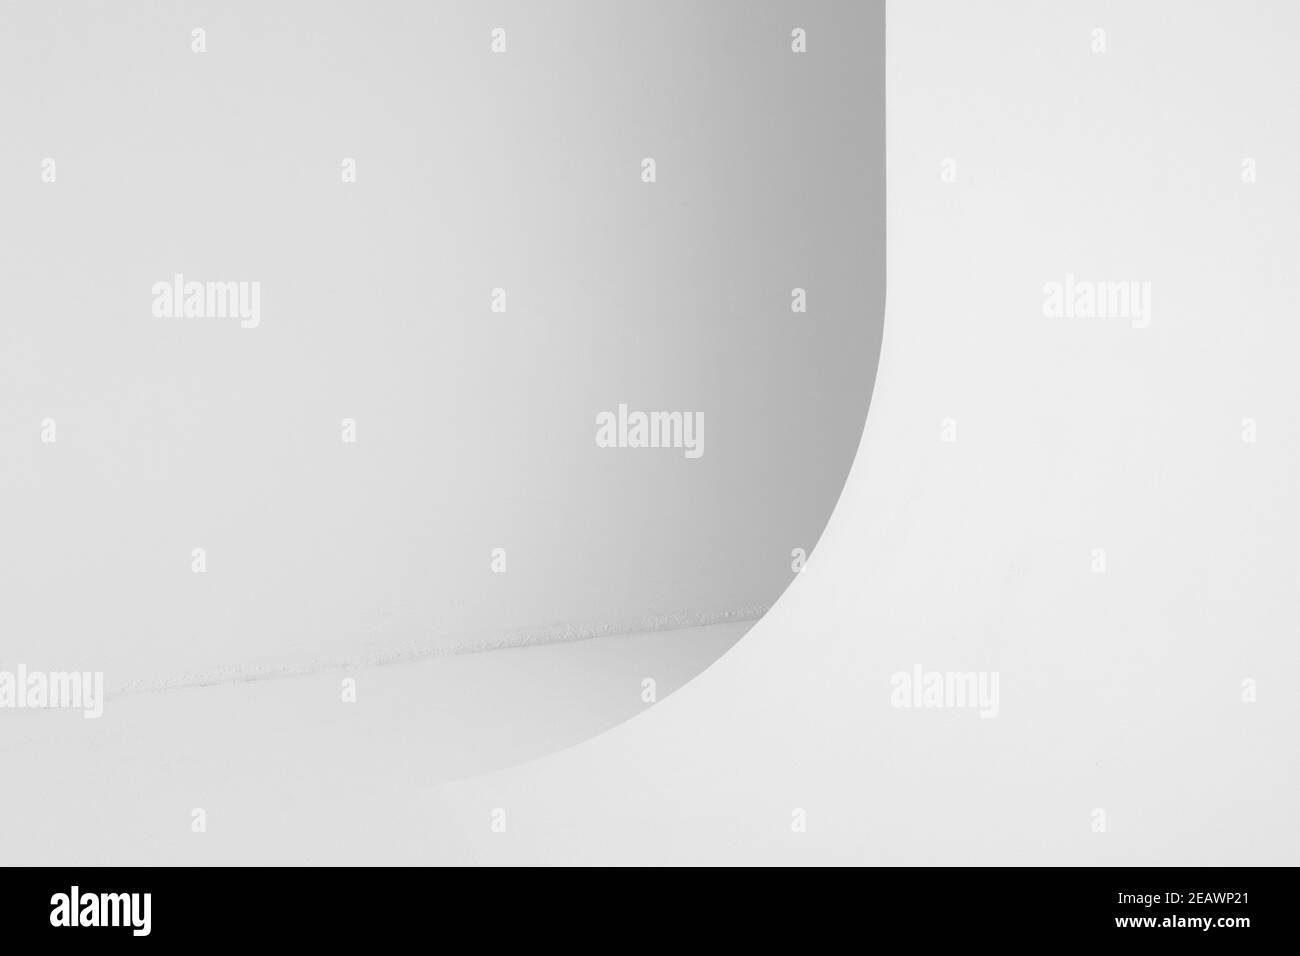 Abstract blank white photo studio interior background, cyclorama structure with a smooth transition between horizontal and vertical planes Stock Photo